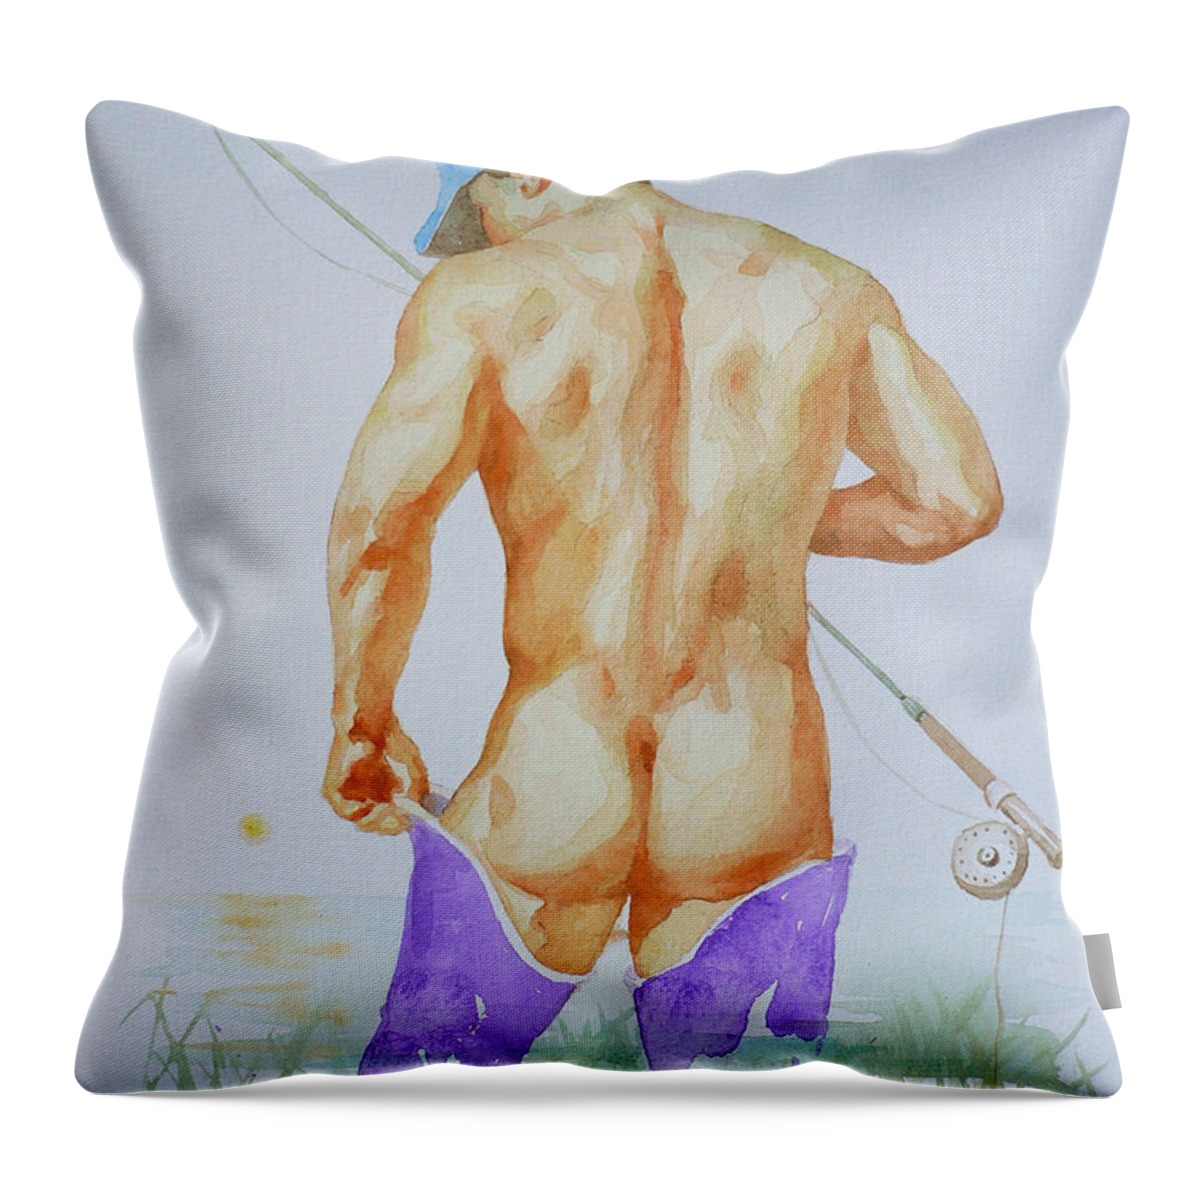 Watercolour Painting Throw Pillow featuring the painting Original Watercolour Painting Art Male Nude#20202089 by Hongtao Huang